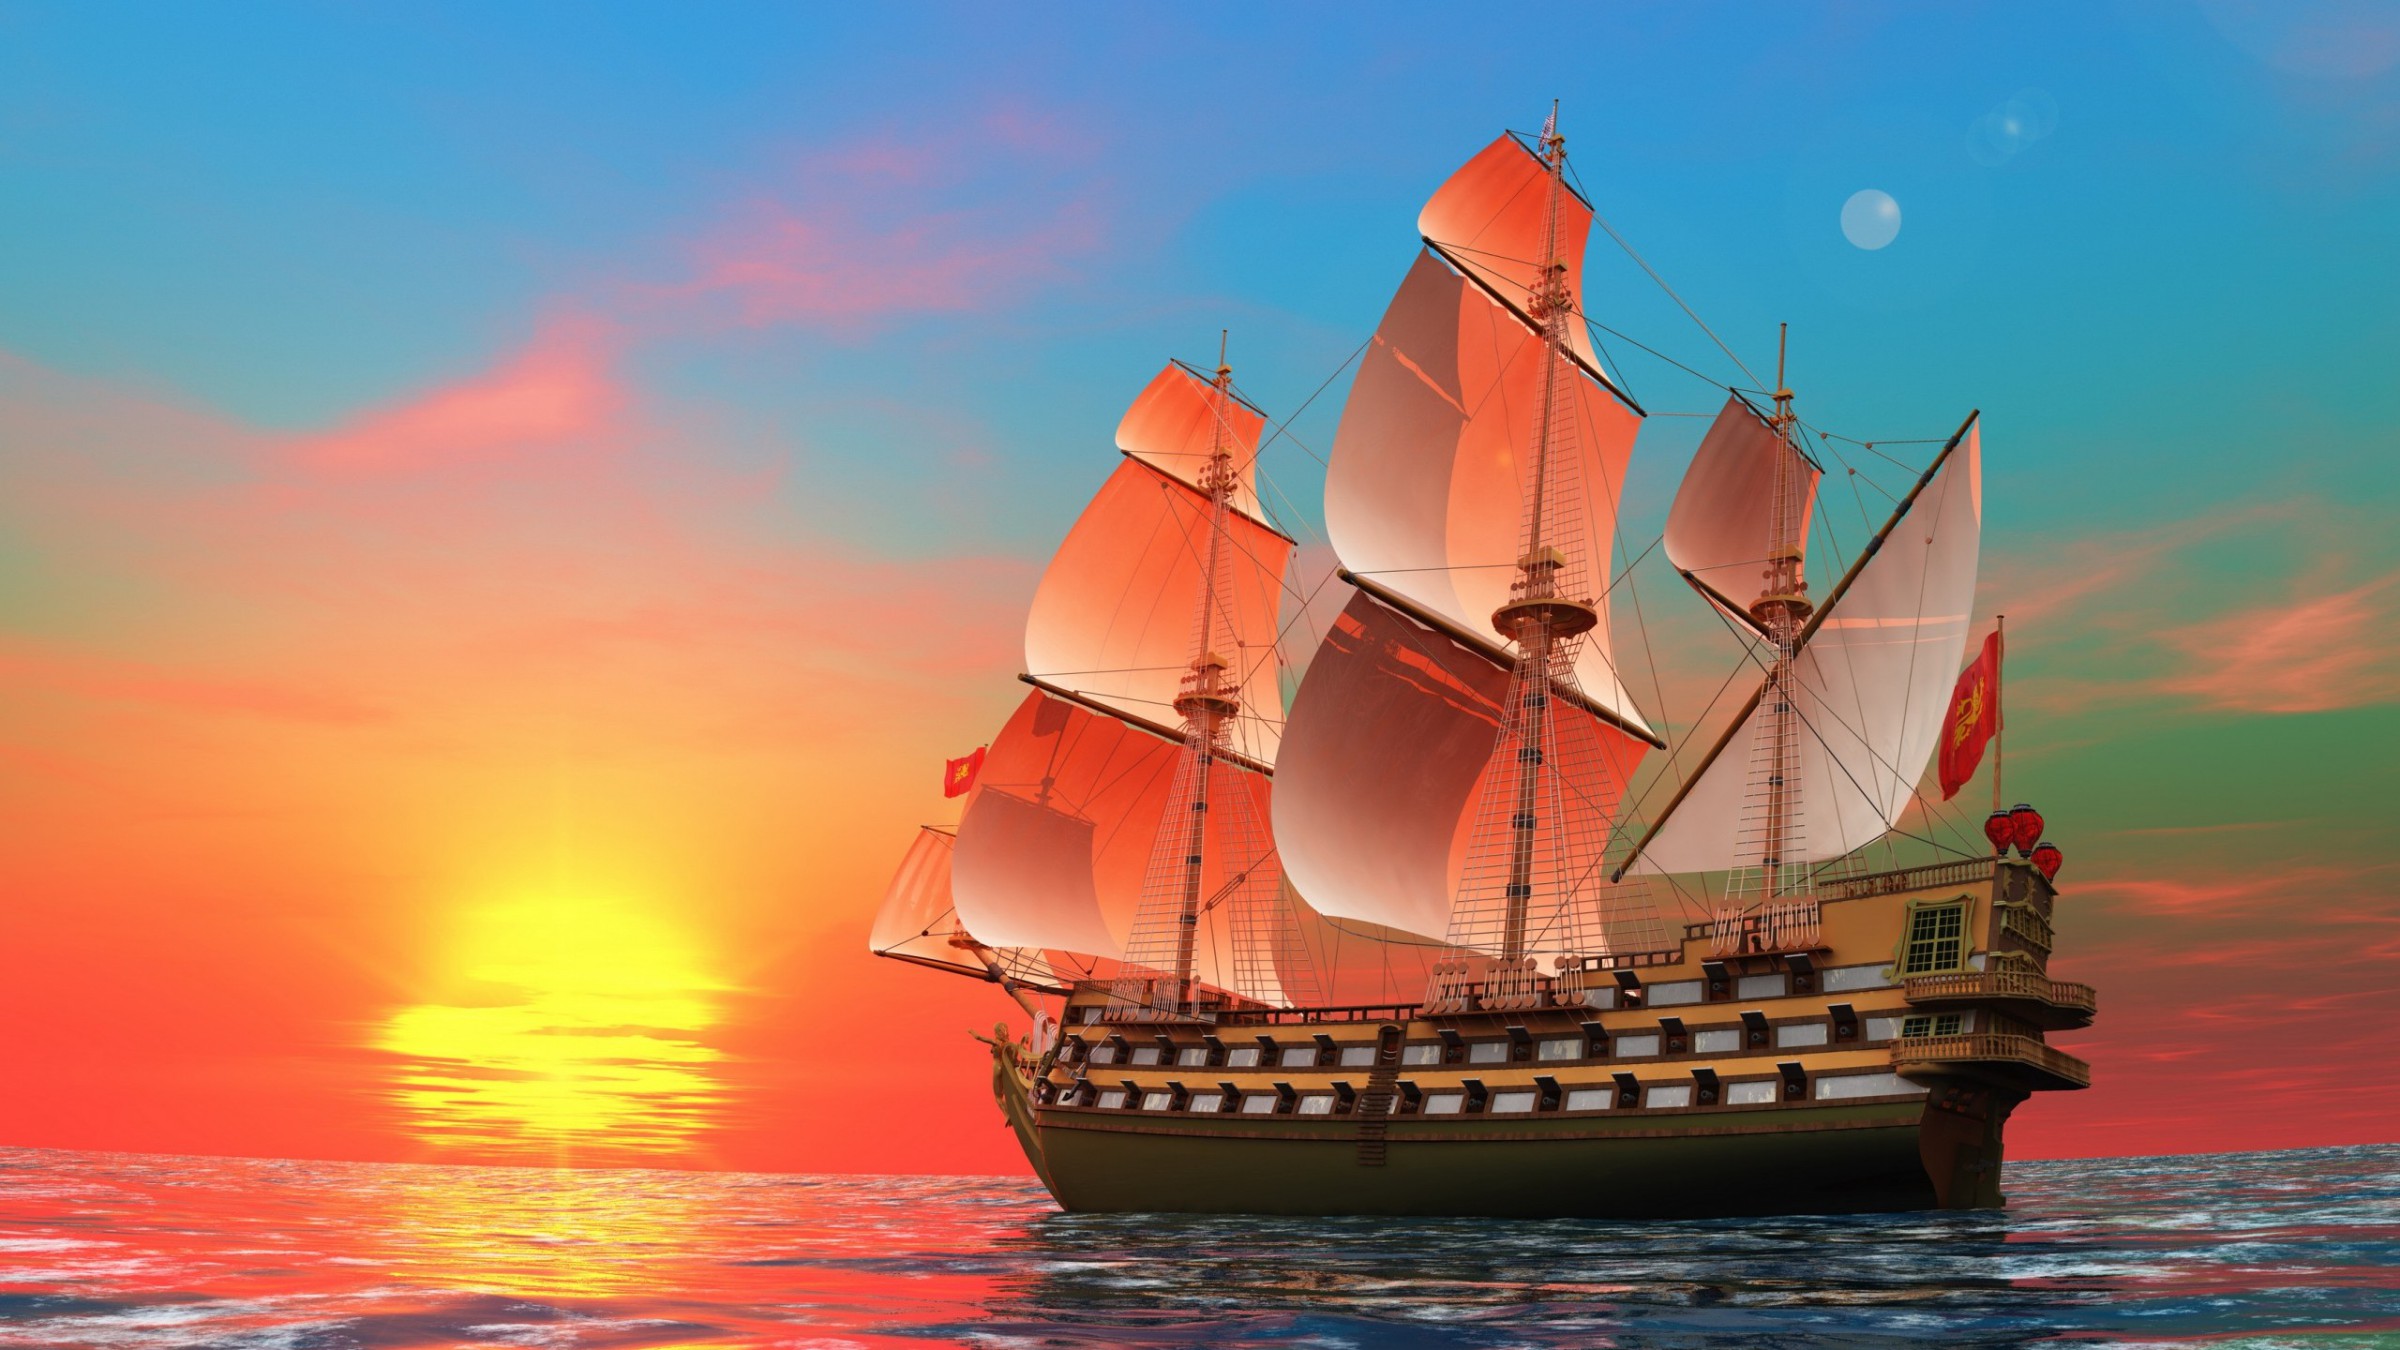 Sunset Time Floating Ship Hd Images